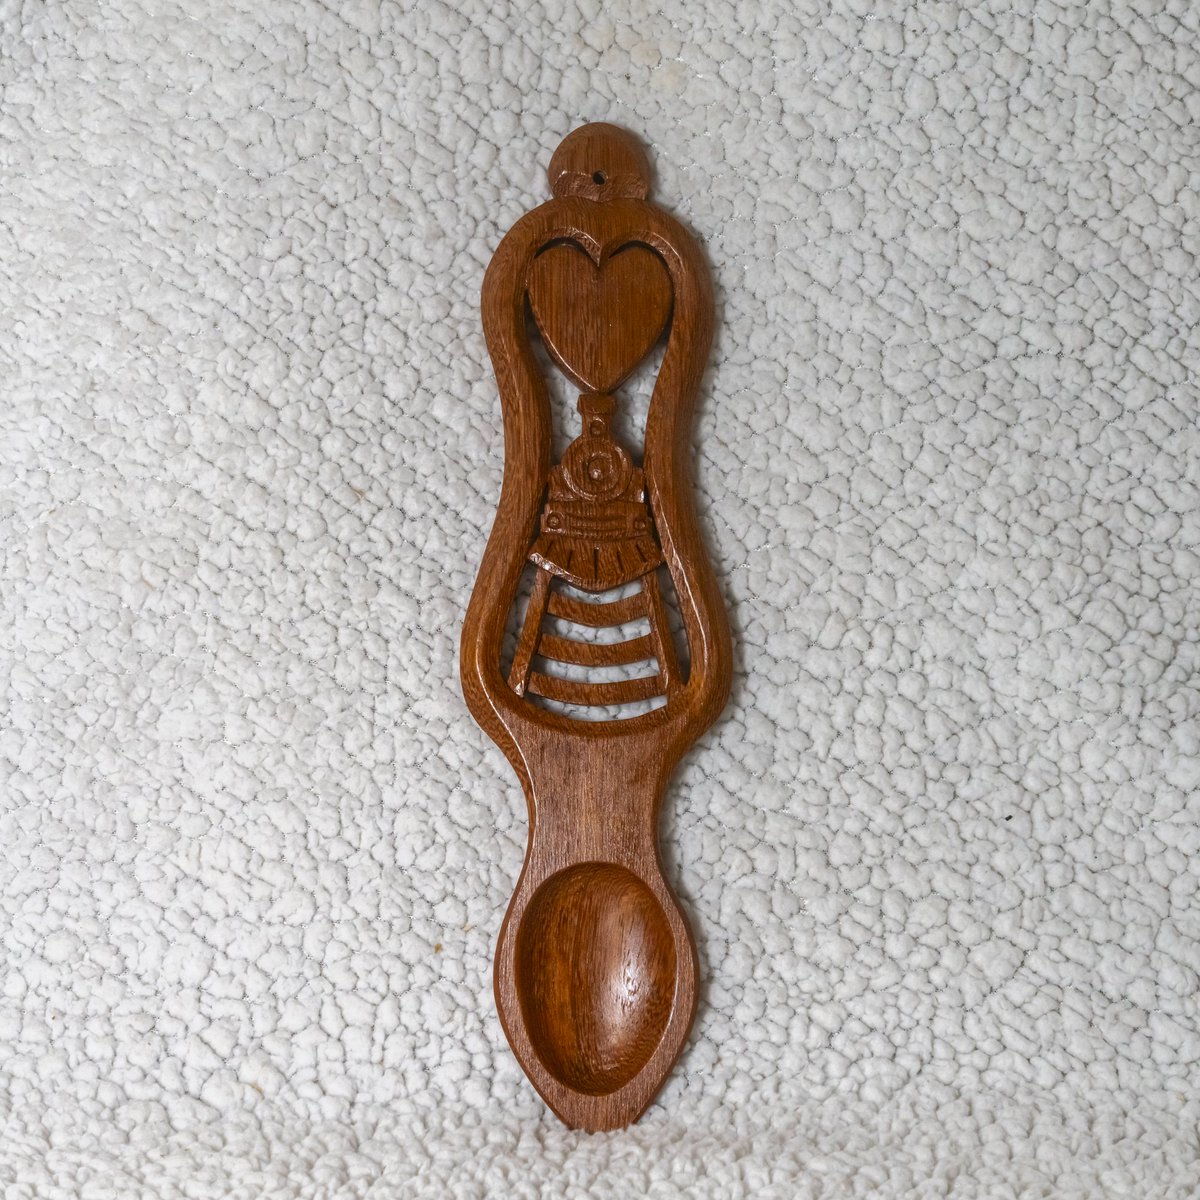 Train themed lovespoon, handcarved from an old Jarrah railway sleeper. 

#lovespoon #welshlovespoon #handcarved #madeinwales #madeinpembrokeshire #spooncarving #spoon #trains